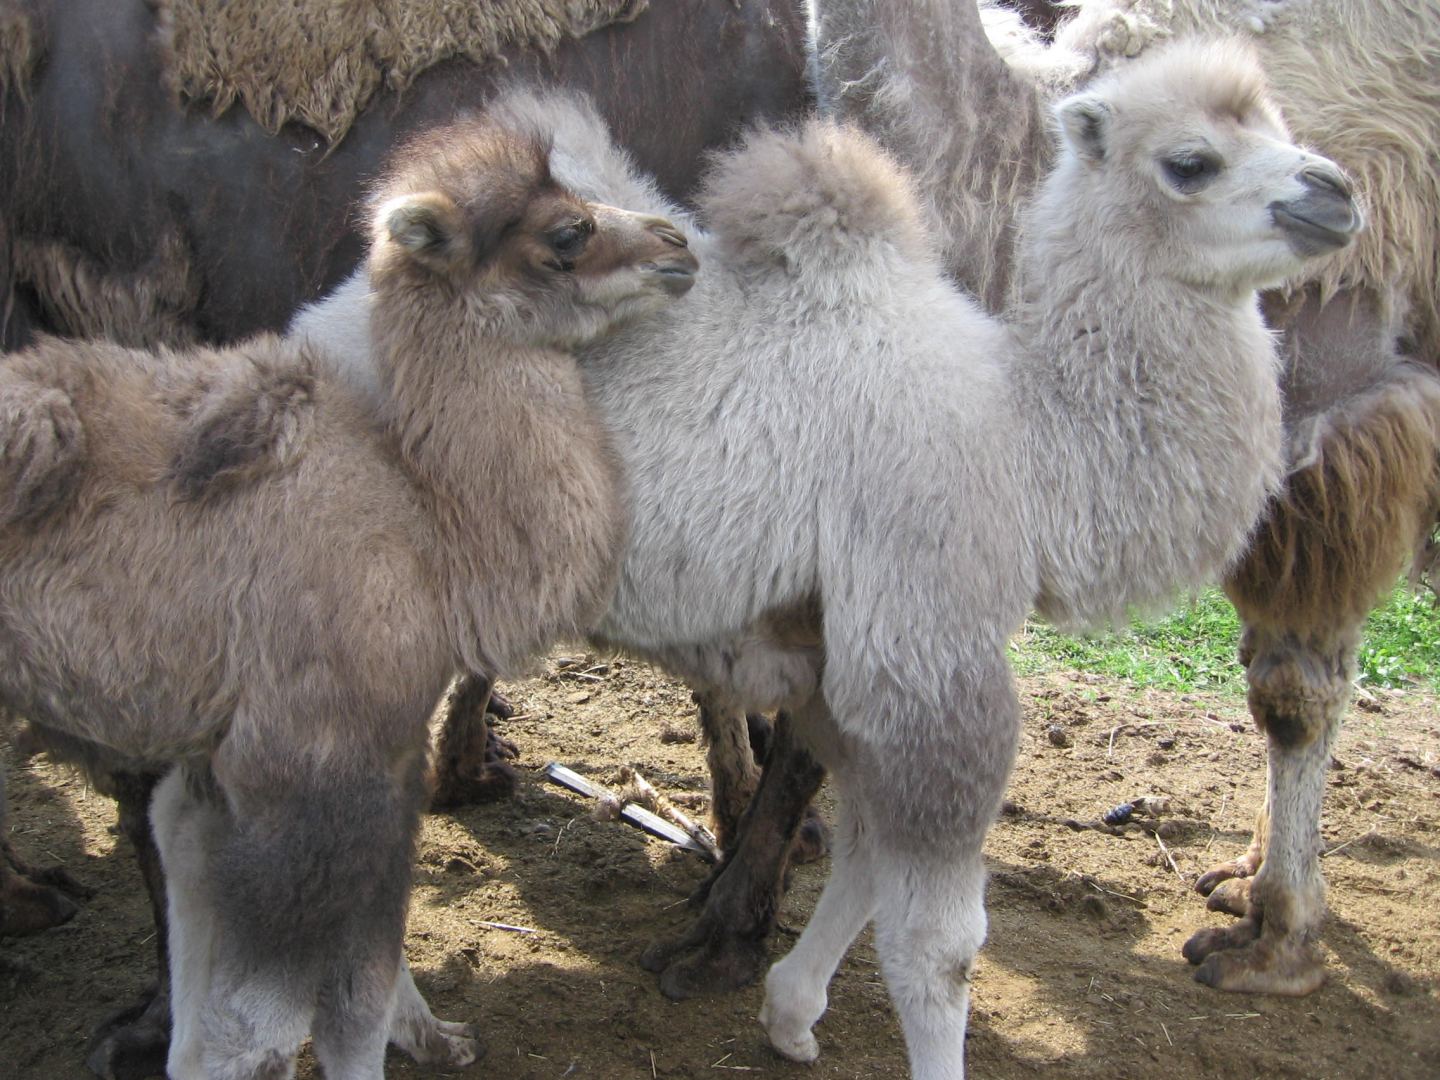 Turkmen farmers fulfill plan to obtain offspring of camels